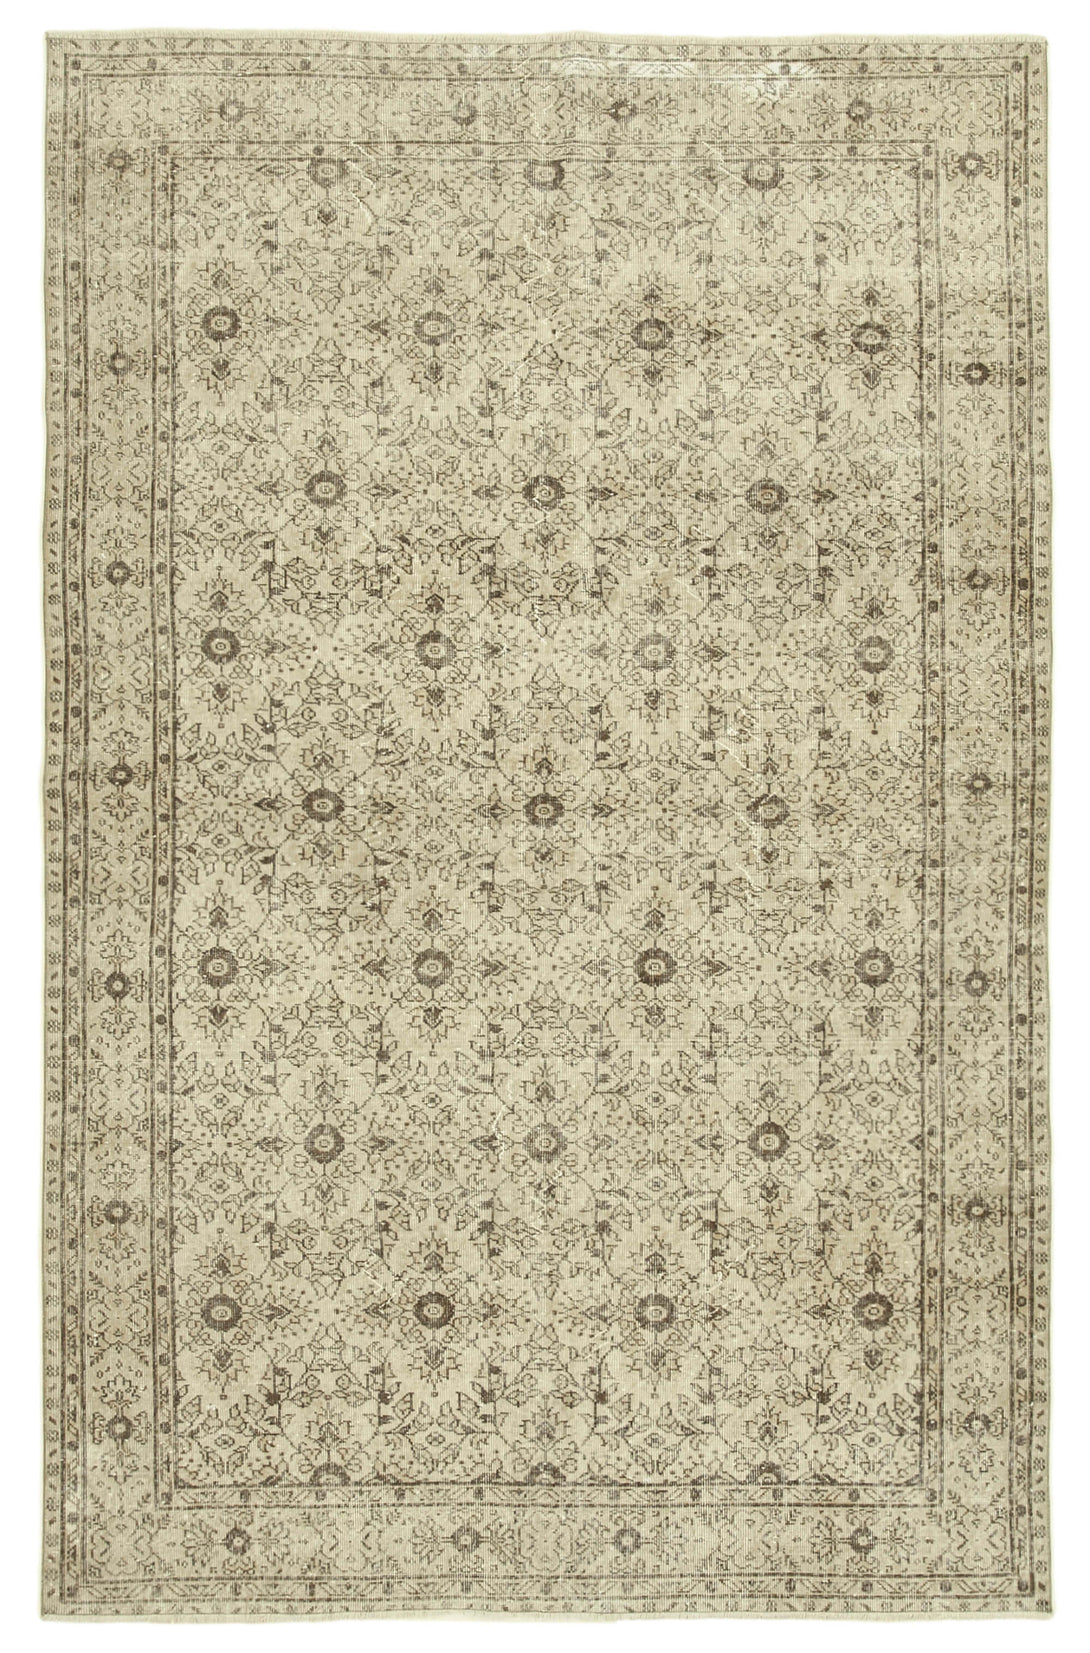 Handmade White Wash Area Rug > Design# OL-AC-38836 > Size: 6'-9" x 10'-10", Carpet Culture Rugs, Handmade Rugs, NYC Rugs, New Rugs, Shop Rugs, Rug Store, Outlet Rugs, SoHo Rugs, Rugs in USA